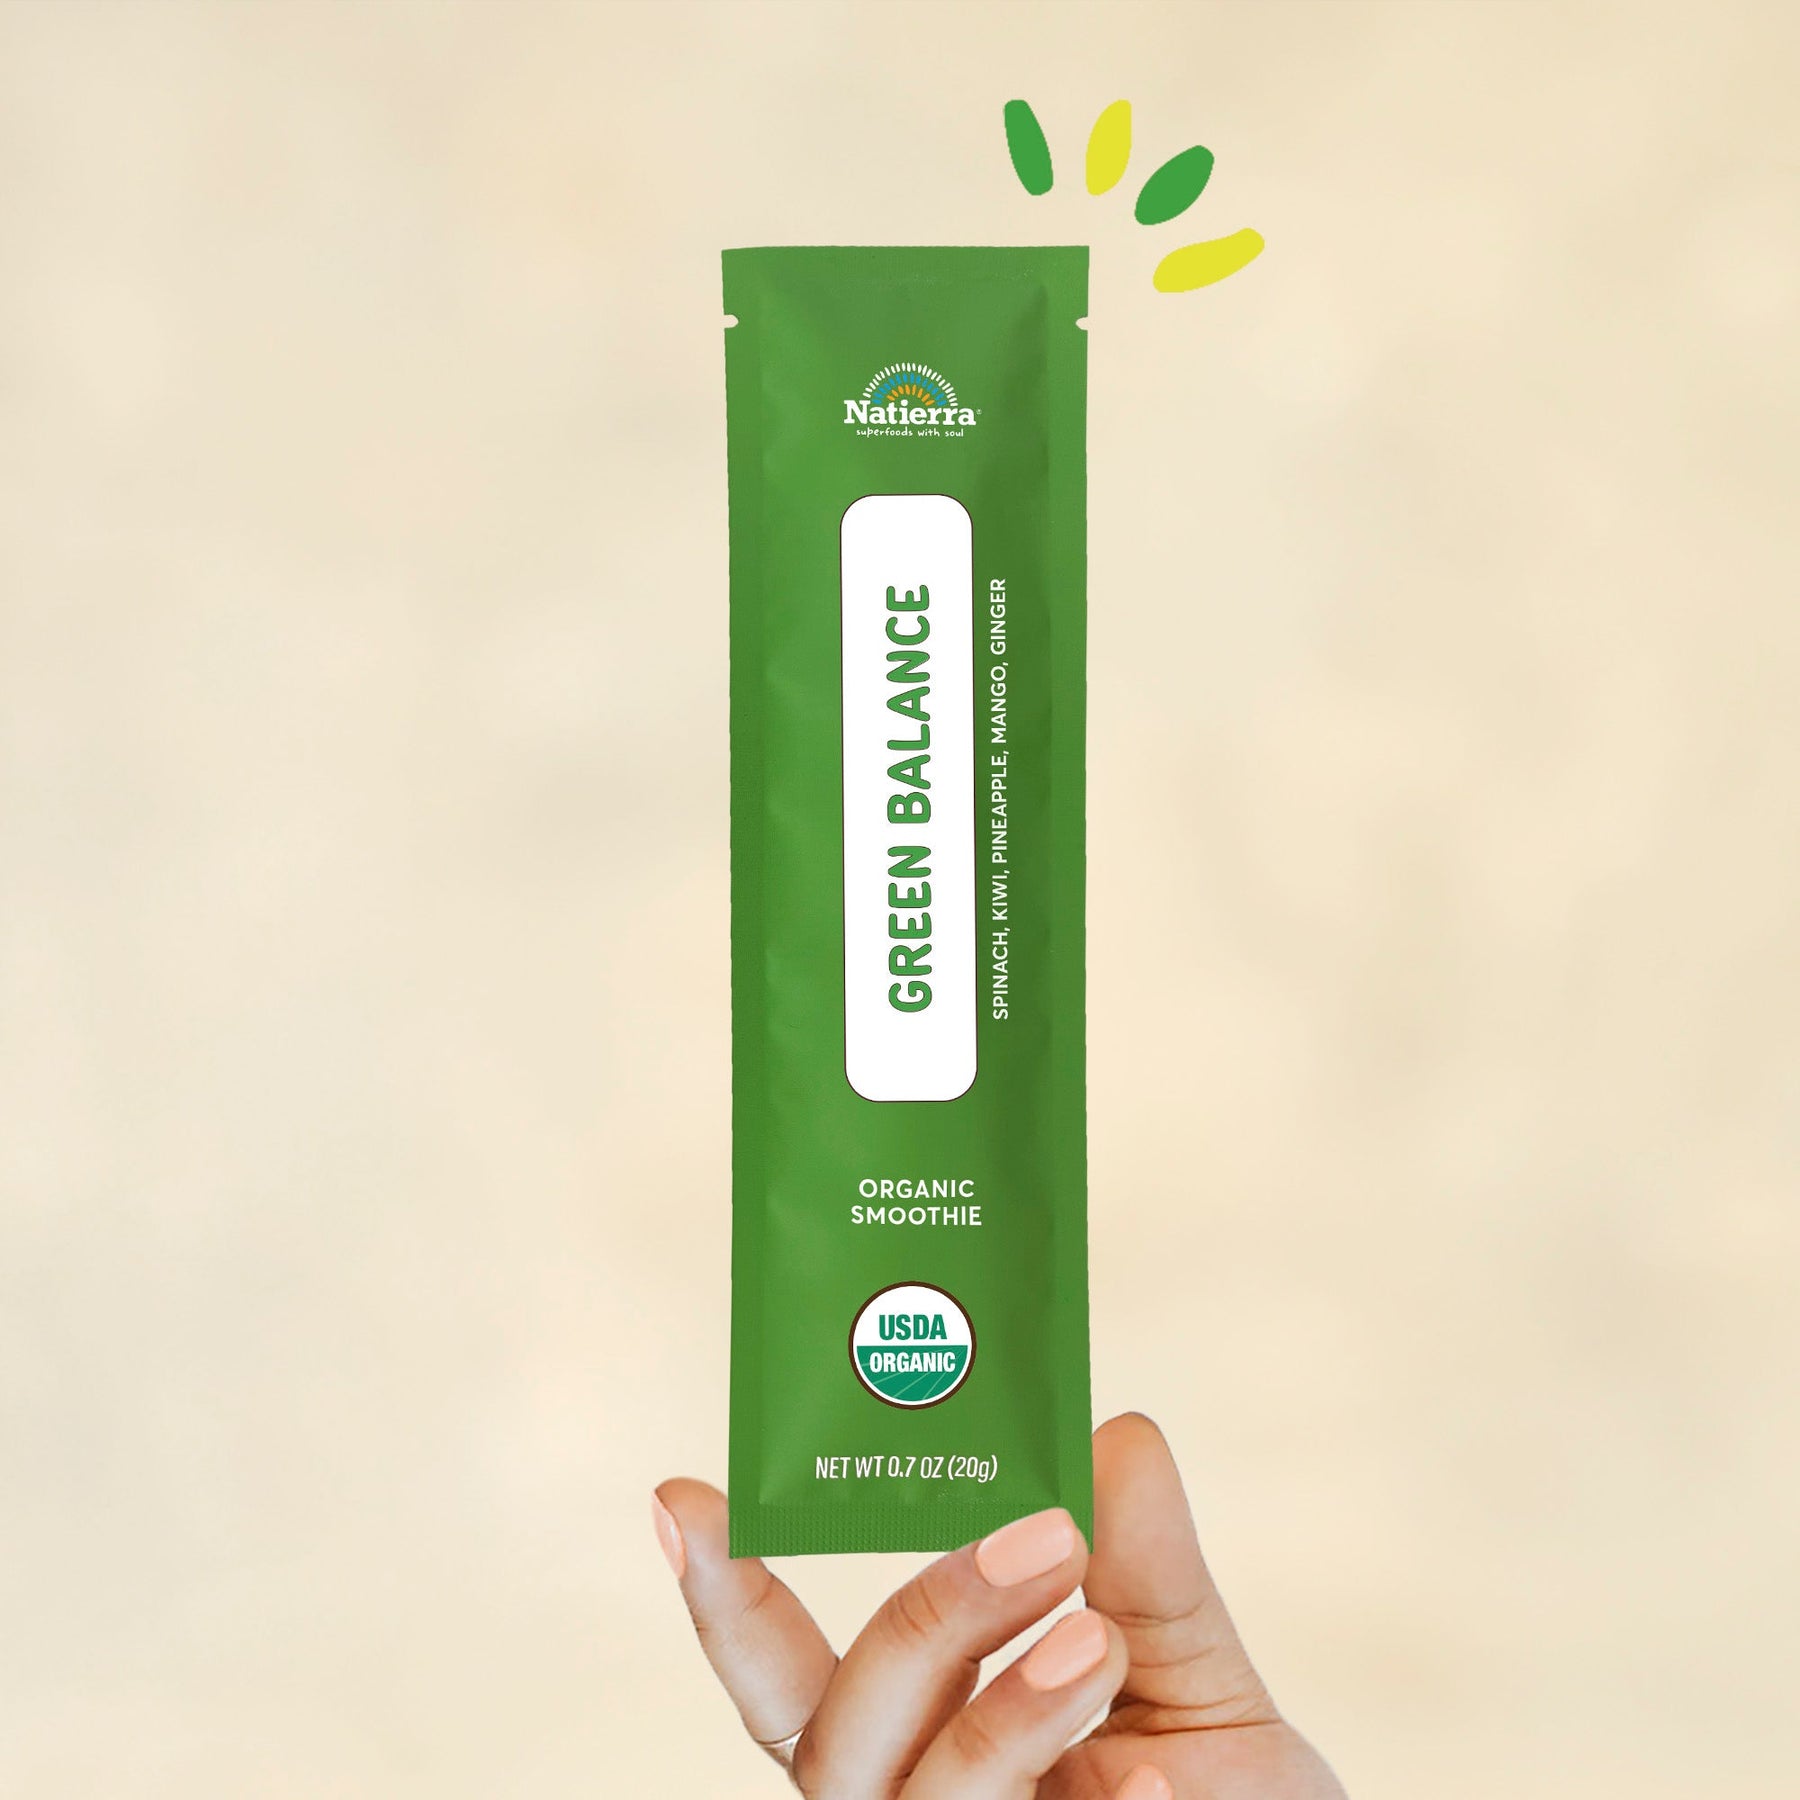 Individual stick pack of Natierra's Green Balance Organic Smoothie held by a hand in front of a creme background